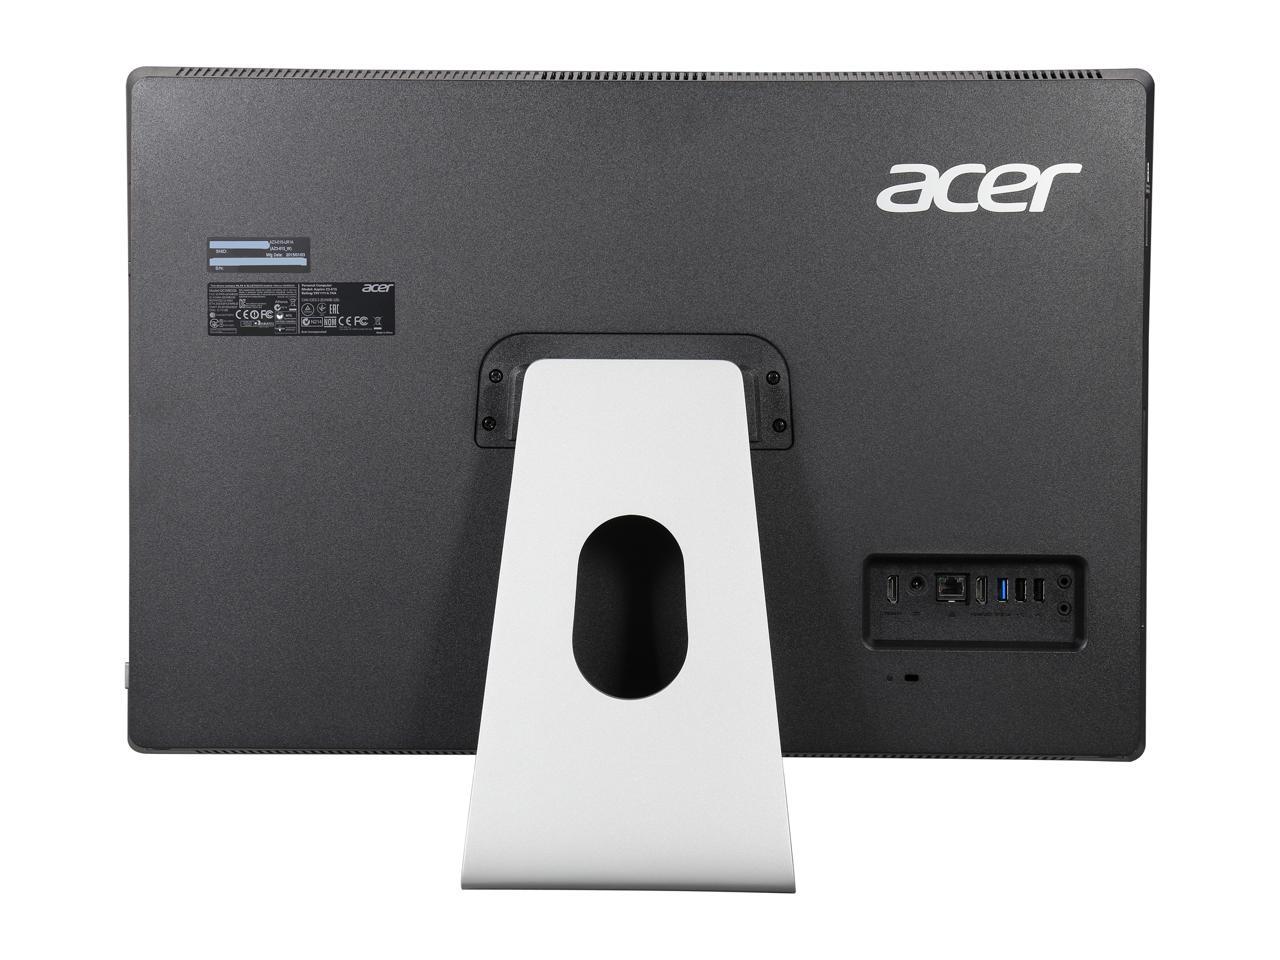 Acer All-in-One PC Aspire AZ3-615-UR1A Intel Core i3 4160T (3.10GHz ...